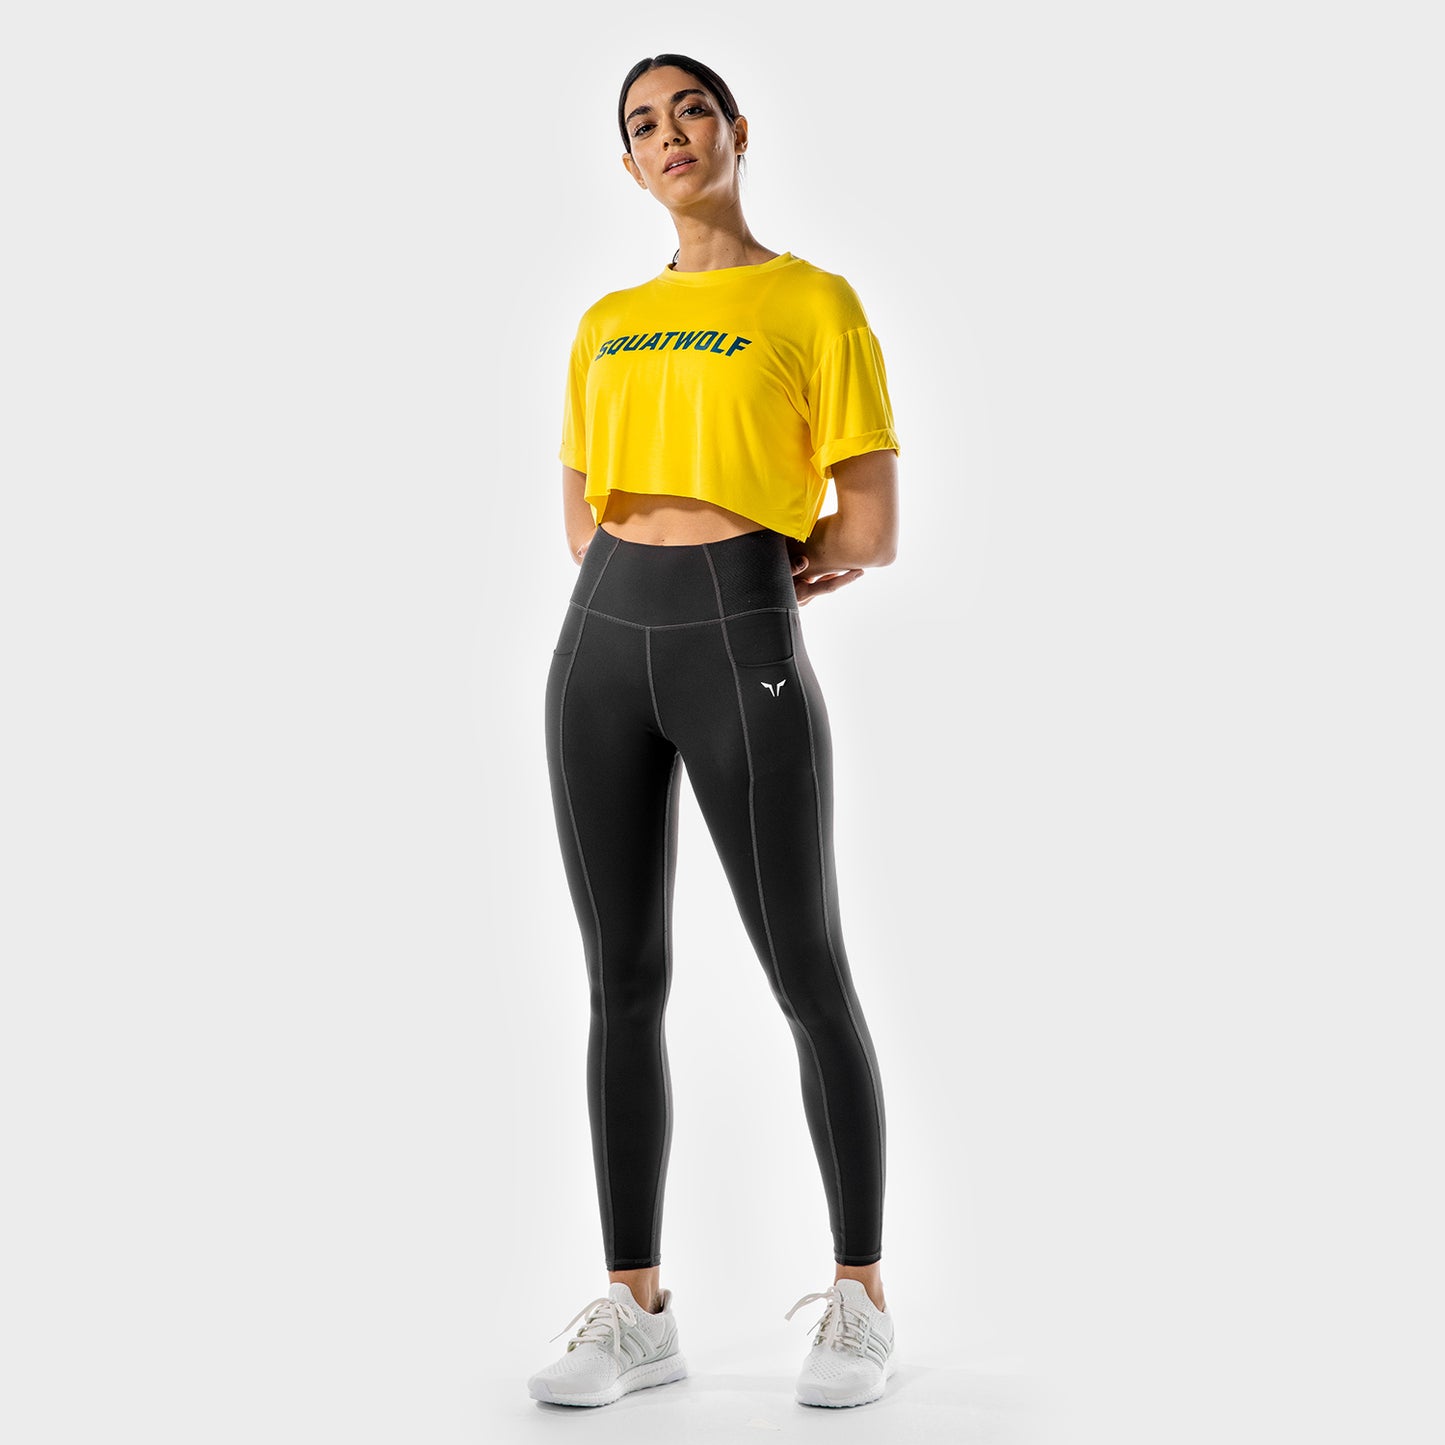 squatwolf-gym-t-shirts-for-women-iconic-crop-tee-yellow-workout-clothes